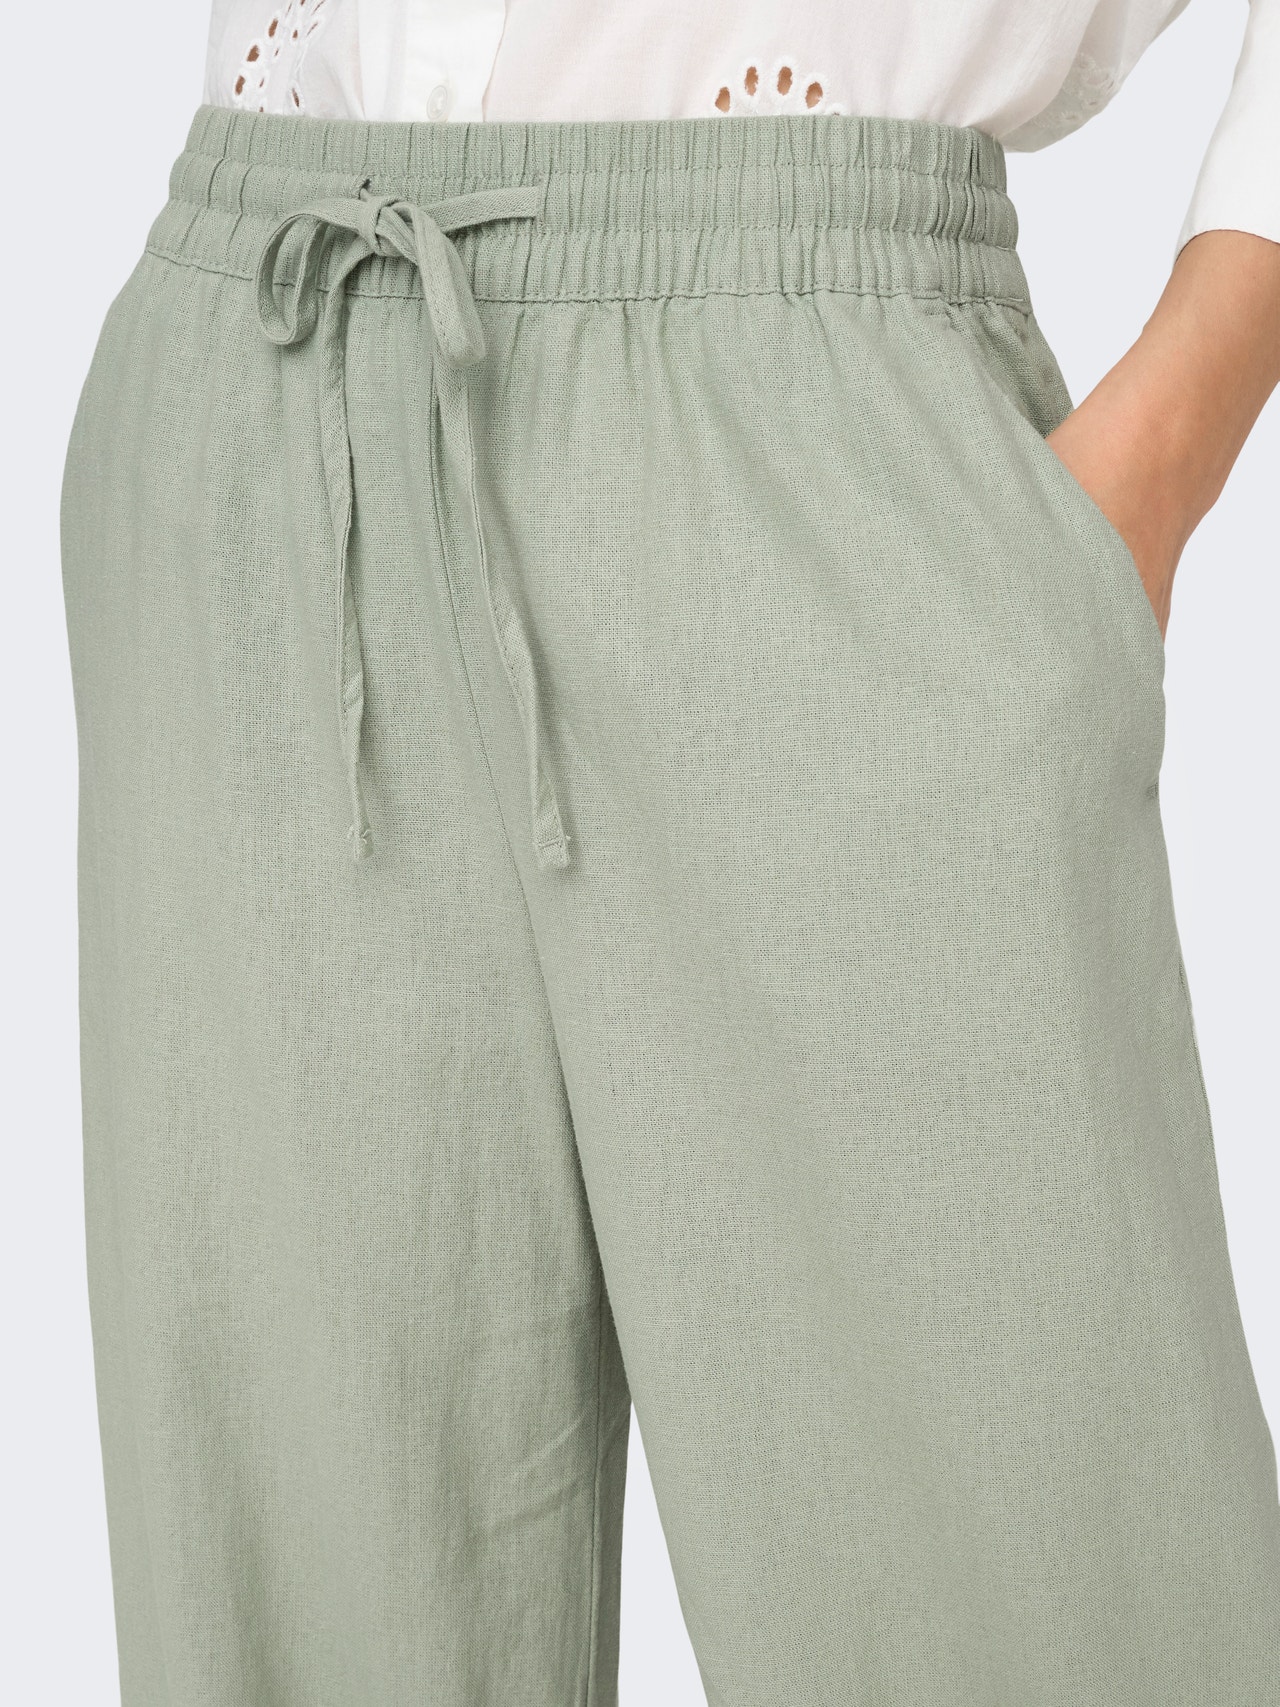 ONLY Classic trousers with high waist -Desert Sage - 15318361